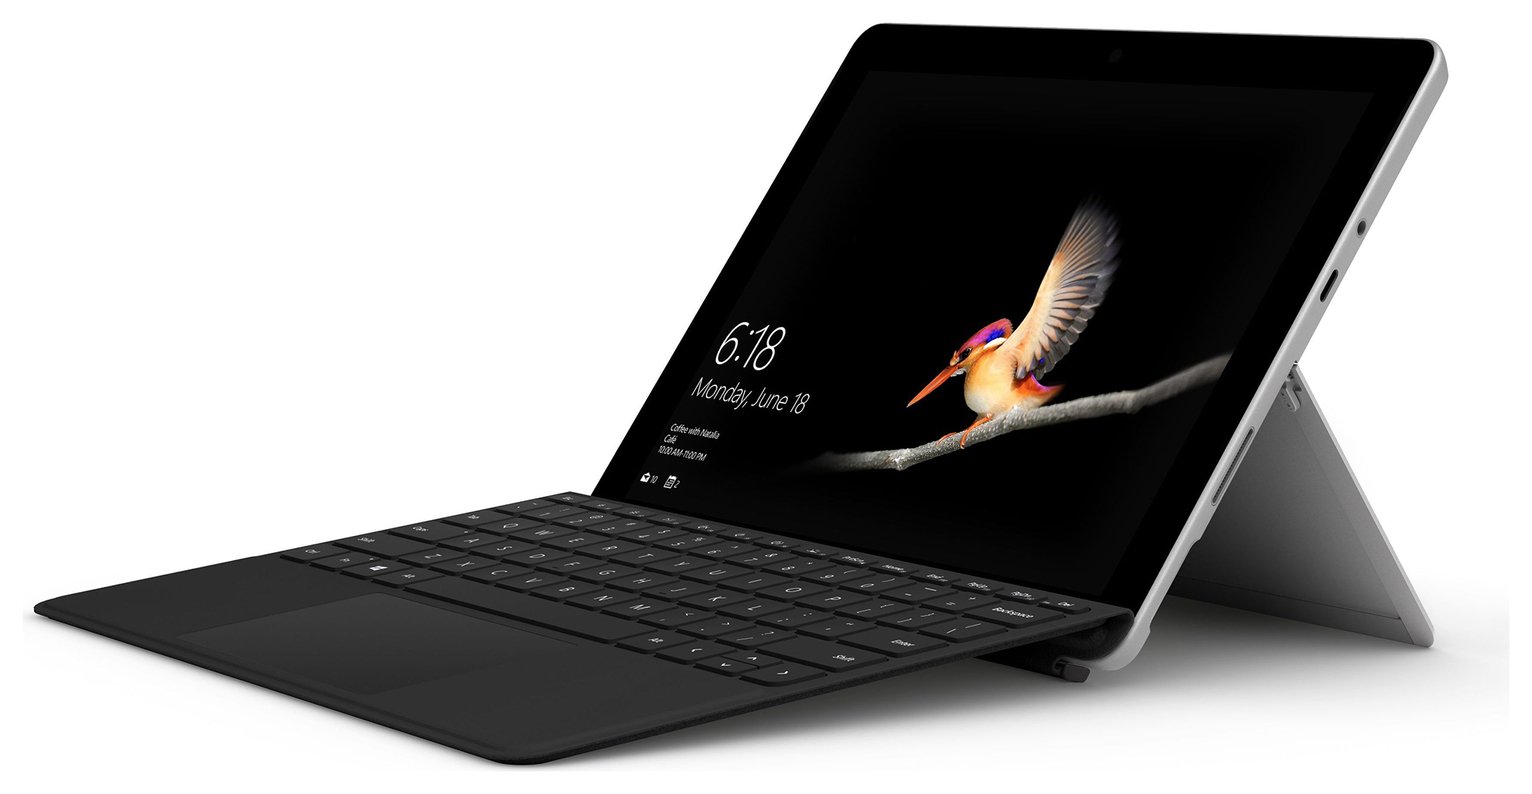 Microsoft Surface Go 4GB 64GB 2-in-1 Laptop with Type Cover review